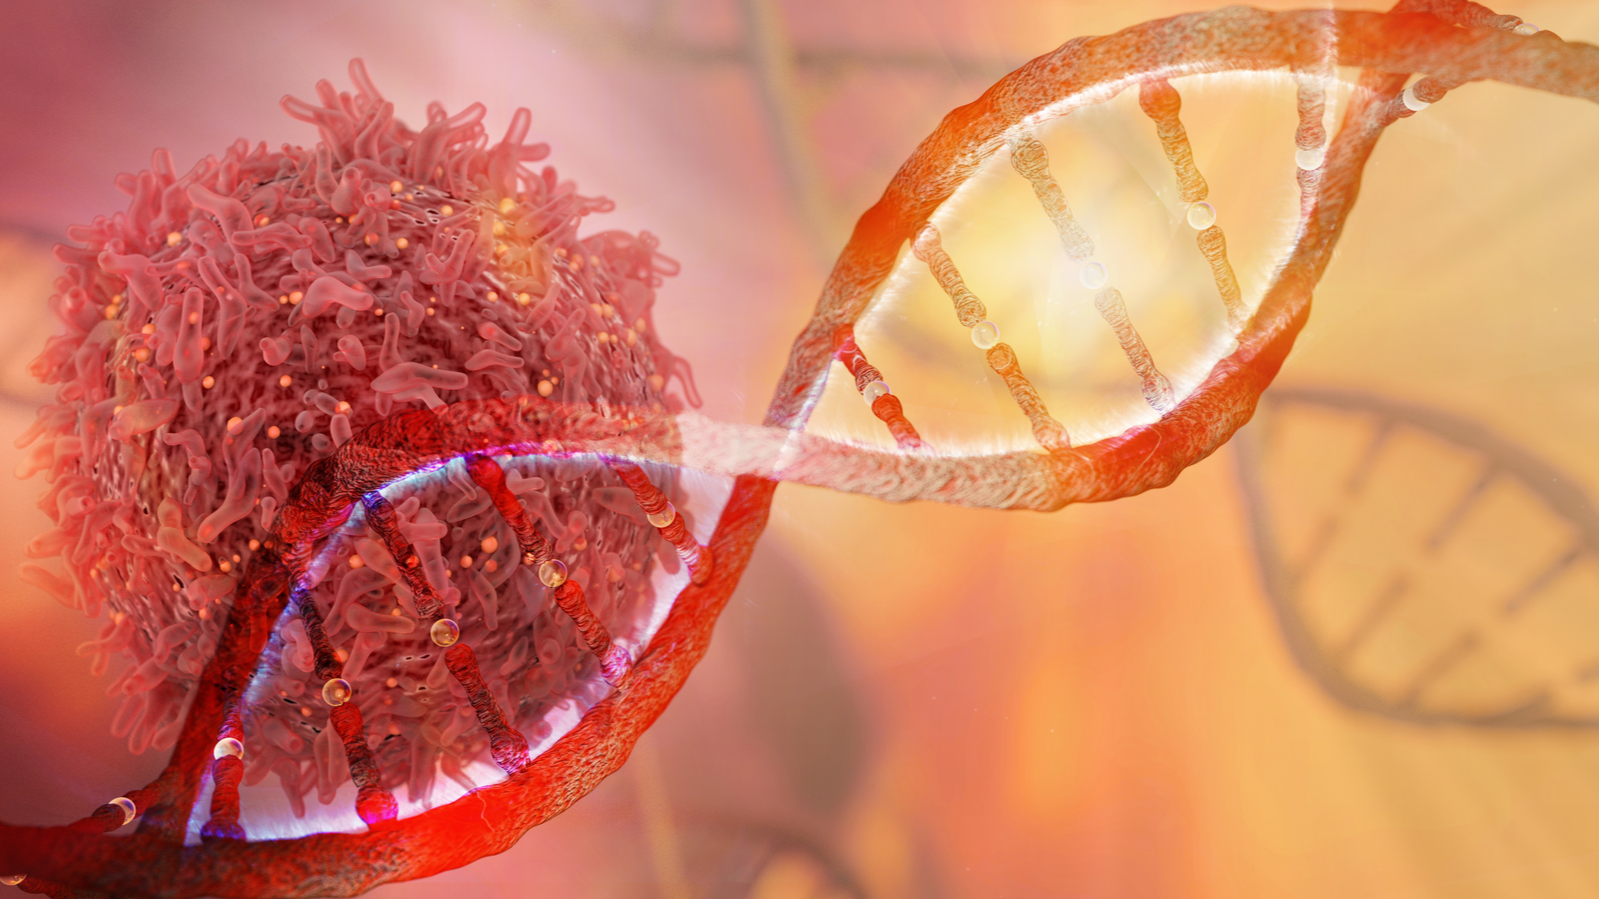 DNA strand and Cancer Cell Oncology Research Concept 3D rendering. Nkarta (NKTX) is a biotech doing cancer research.